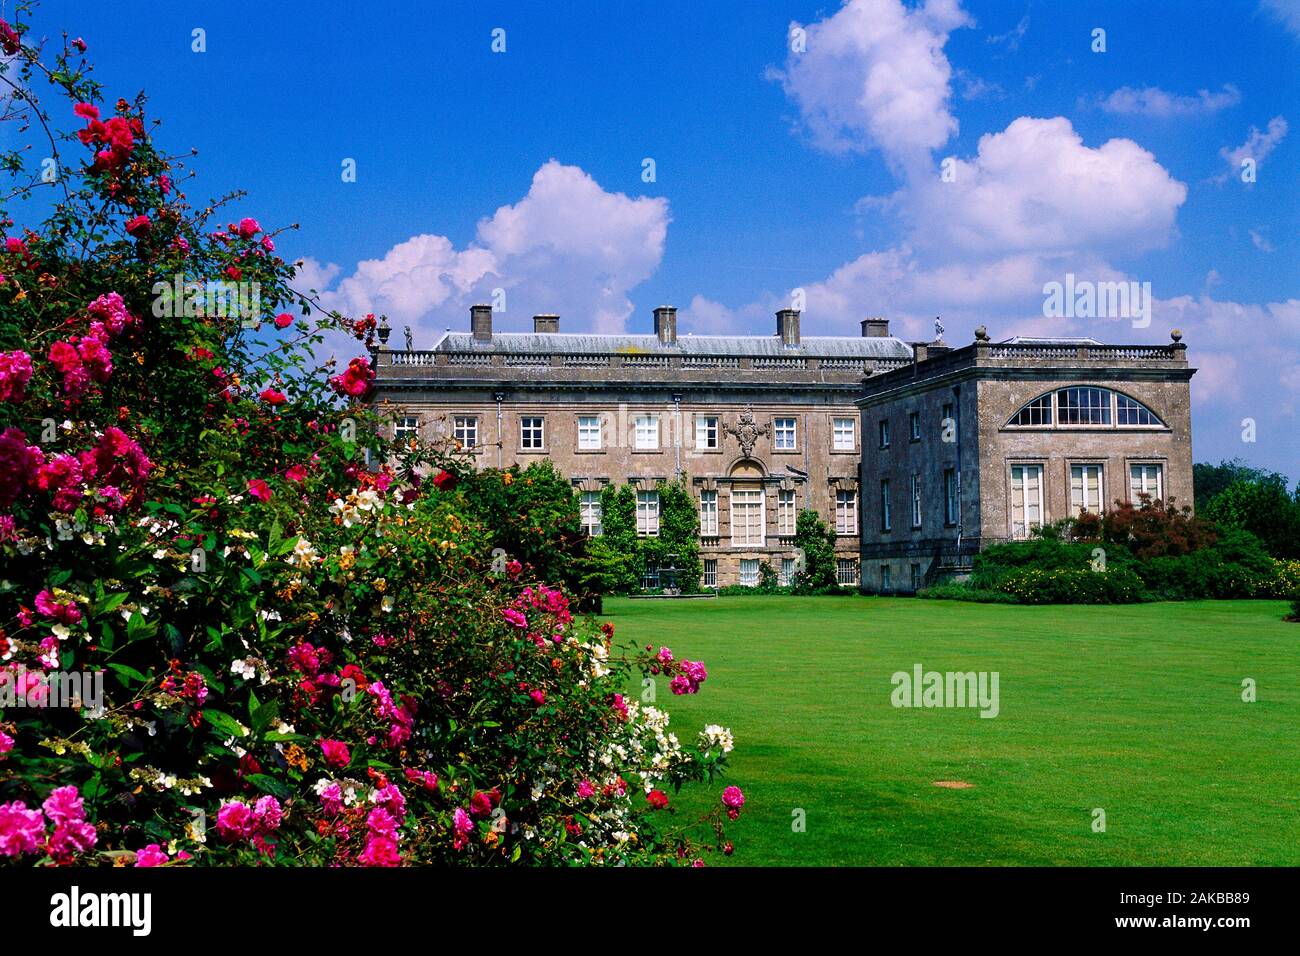 Exterior view of Stourhead House with lawn, Wiltshire, England, UK Stock Photo